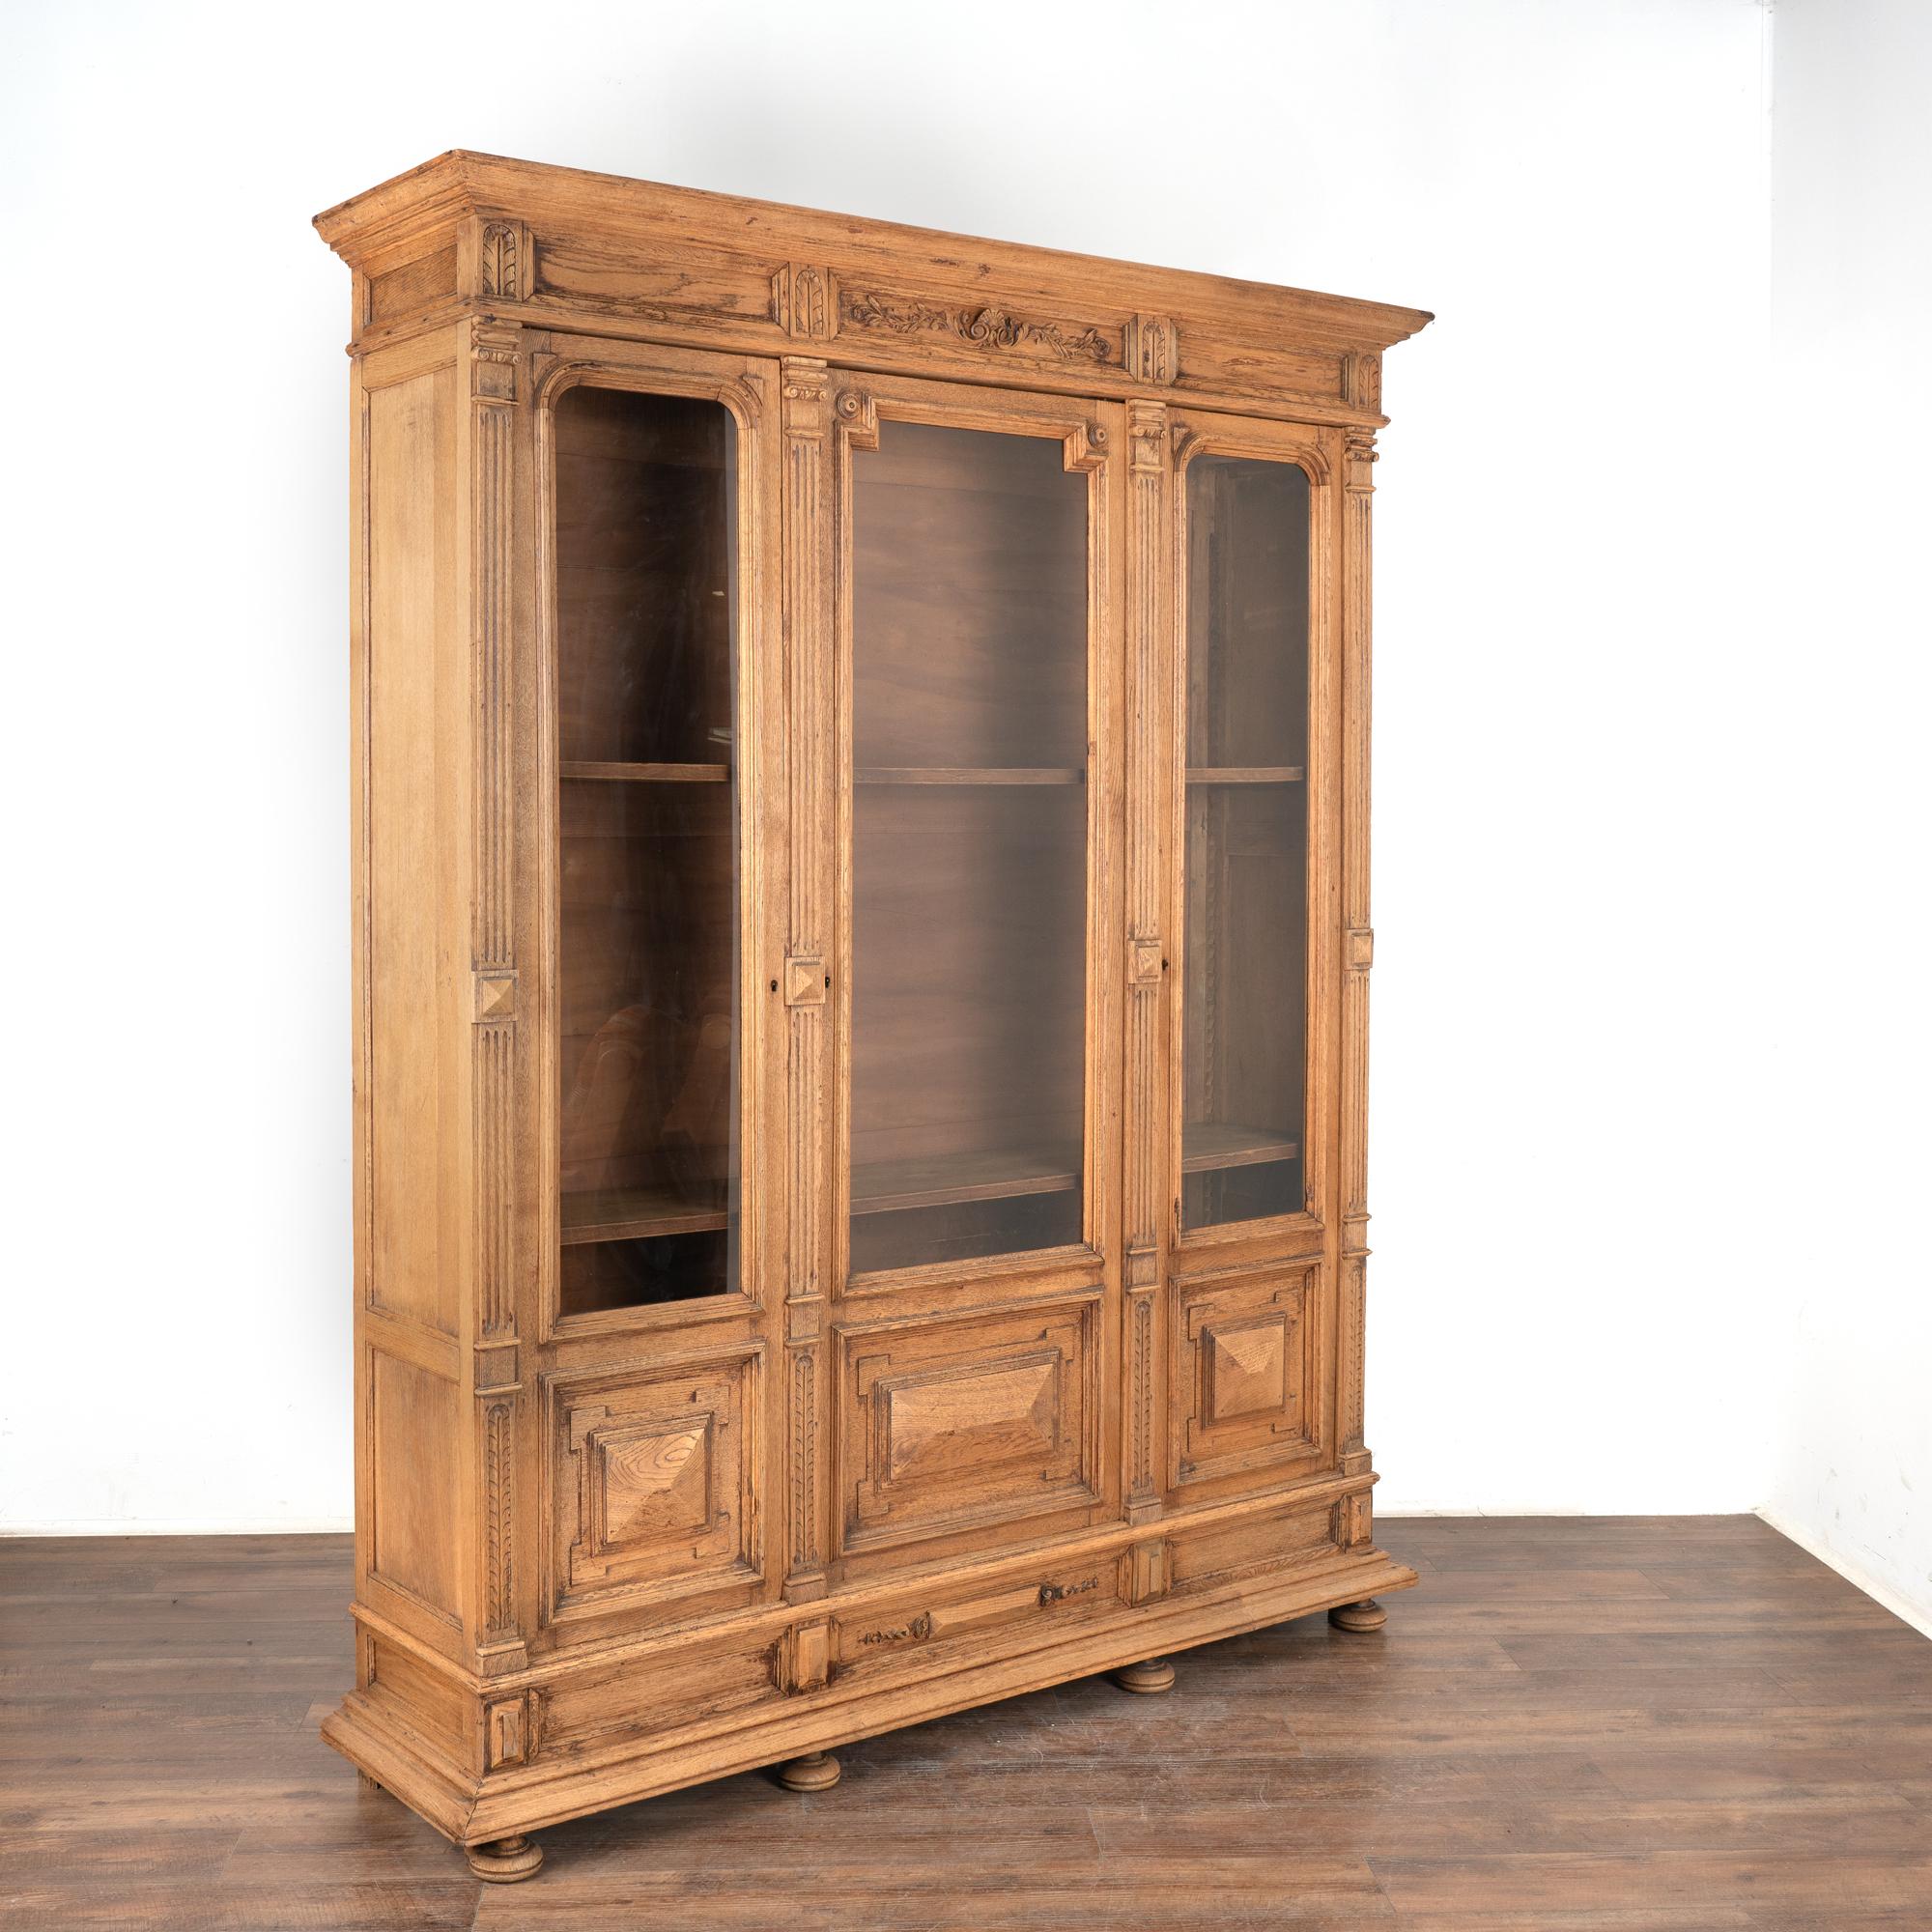 This large bleached oak bookcase or display cabinet has three long glass panels with heavy carved panel on bottom.
Ideal for display of books or any collection, the three interior shelves are adjustable (pegs included).
Notice in photos there is a